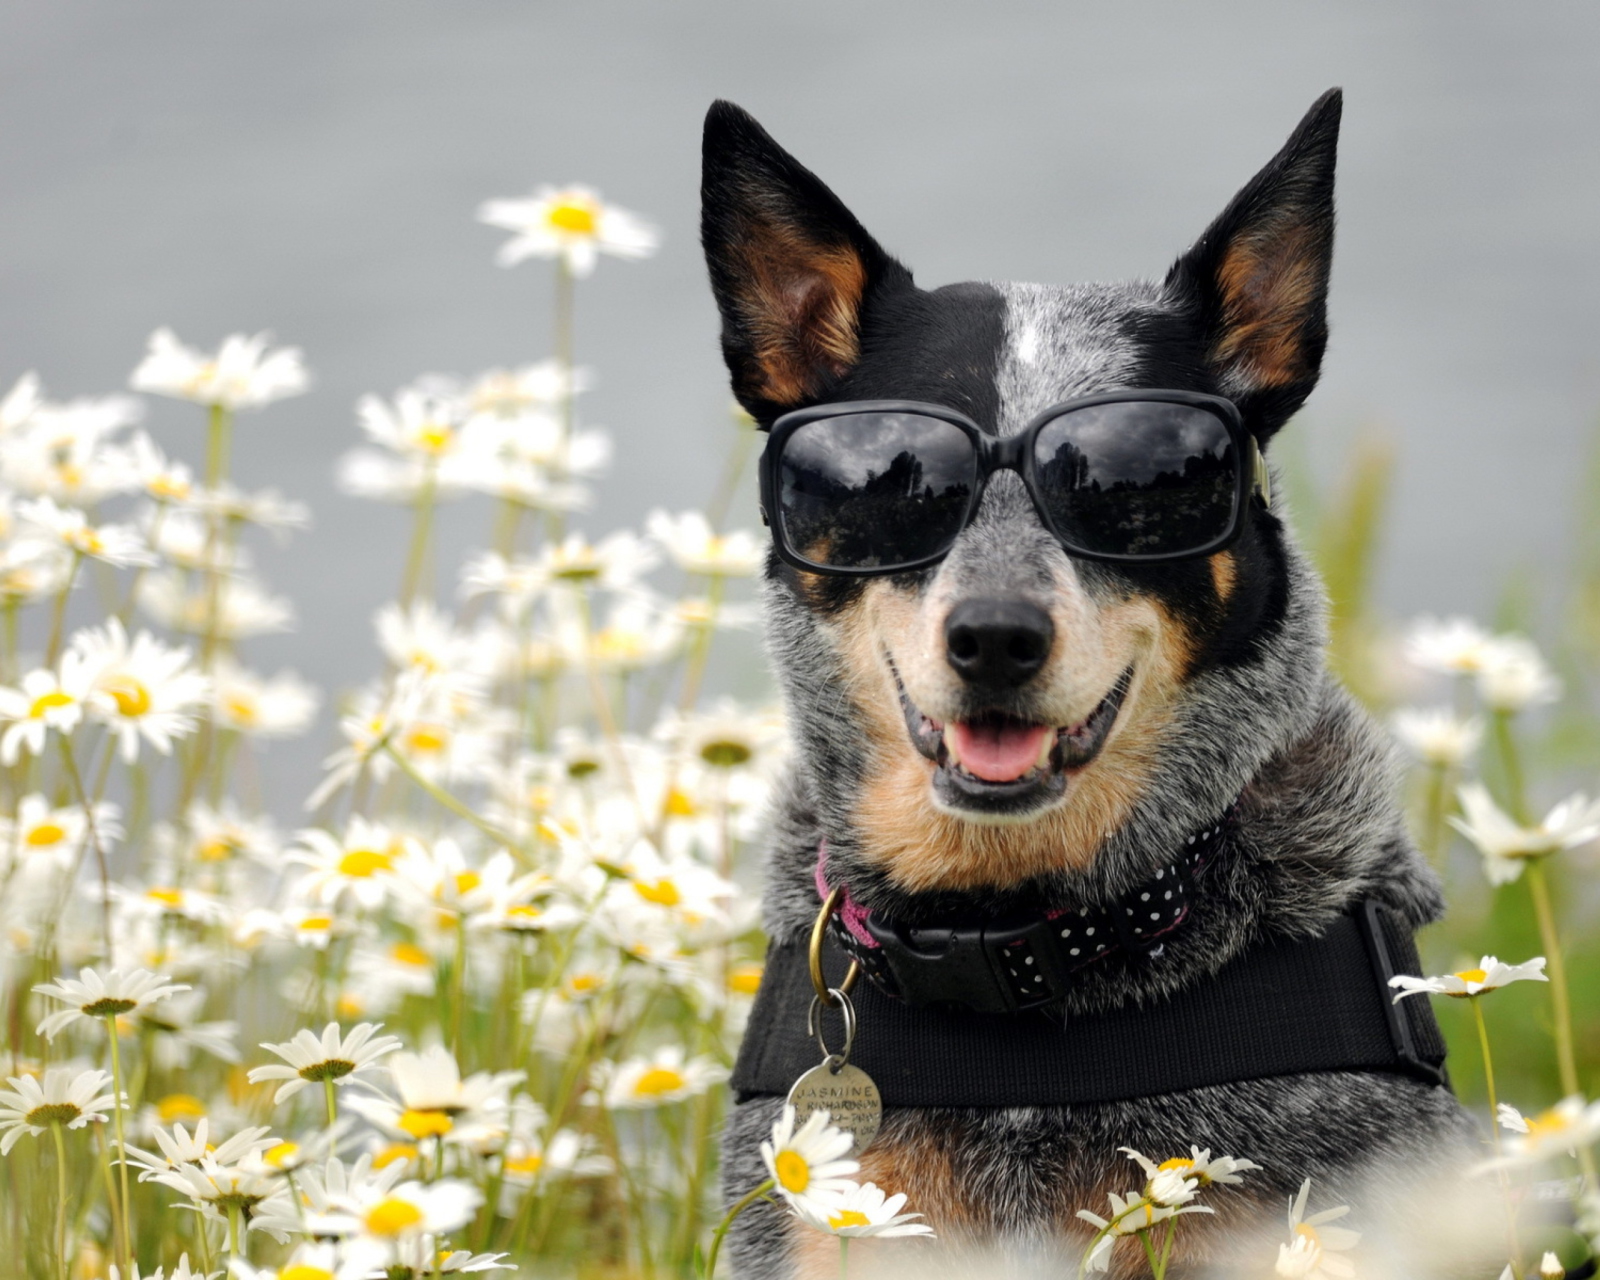 Dog, Sunglasses And Daisies wallpaper 1600x1280